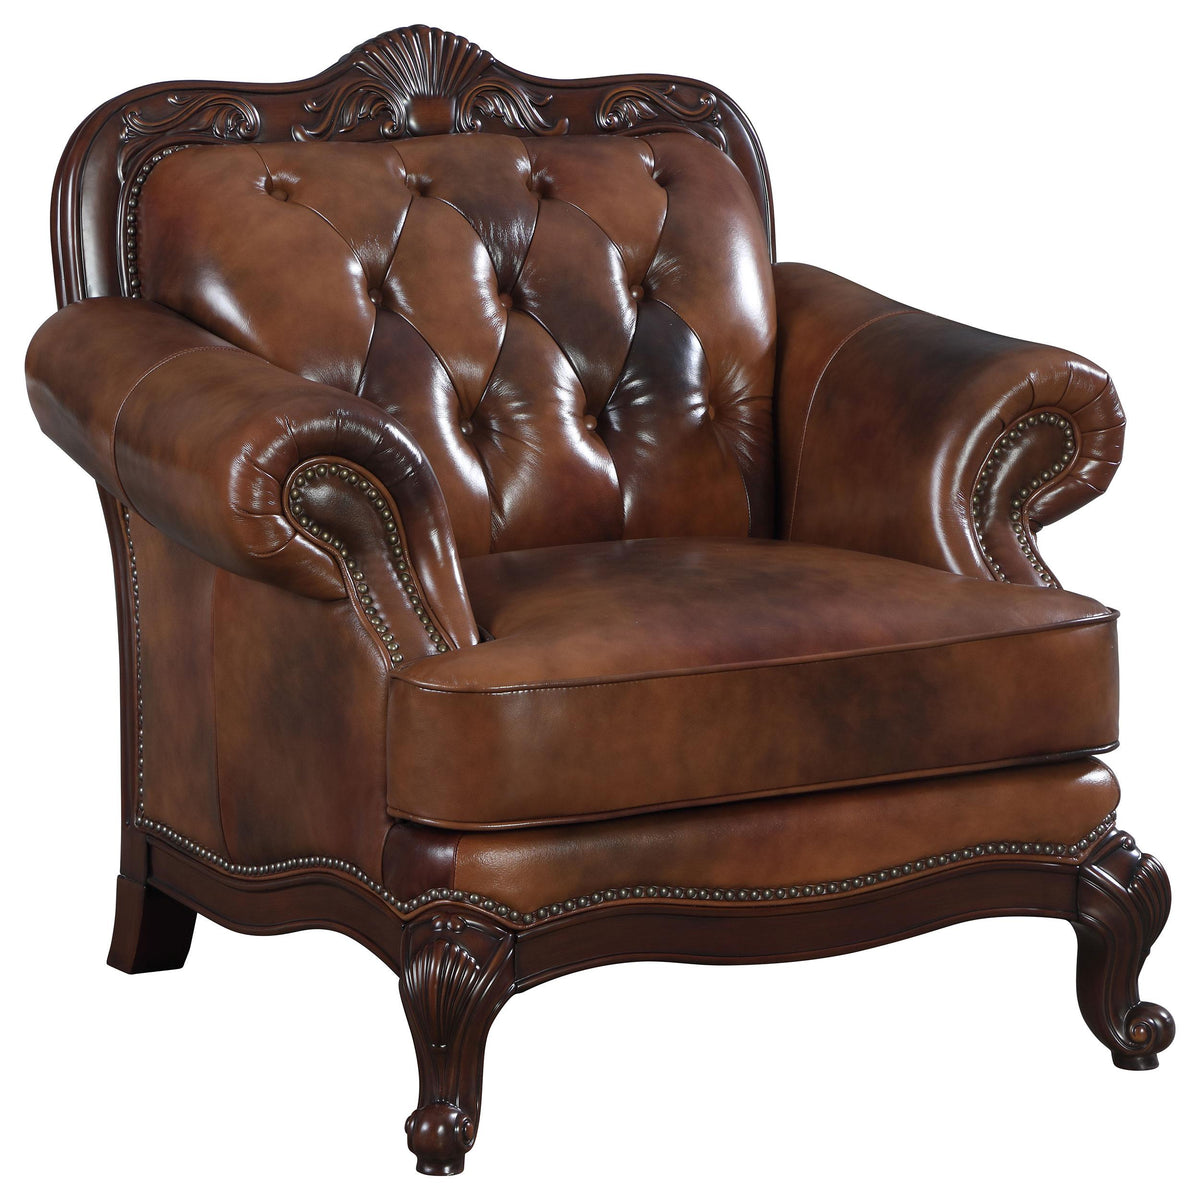 Victoria Rolled Arm Chair Tri-tone and Brown  Las Vegas Furniture Stores